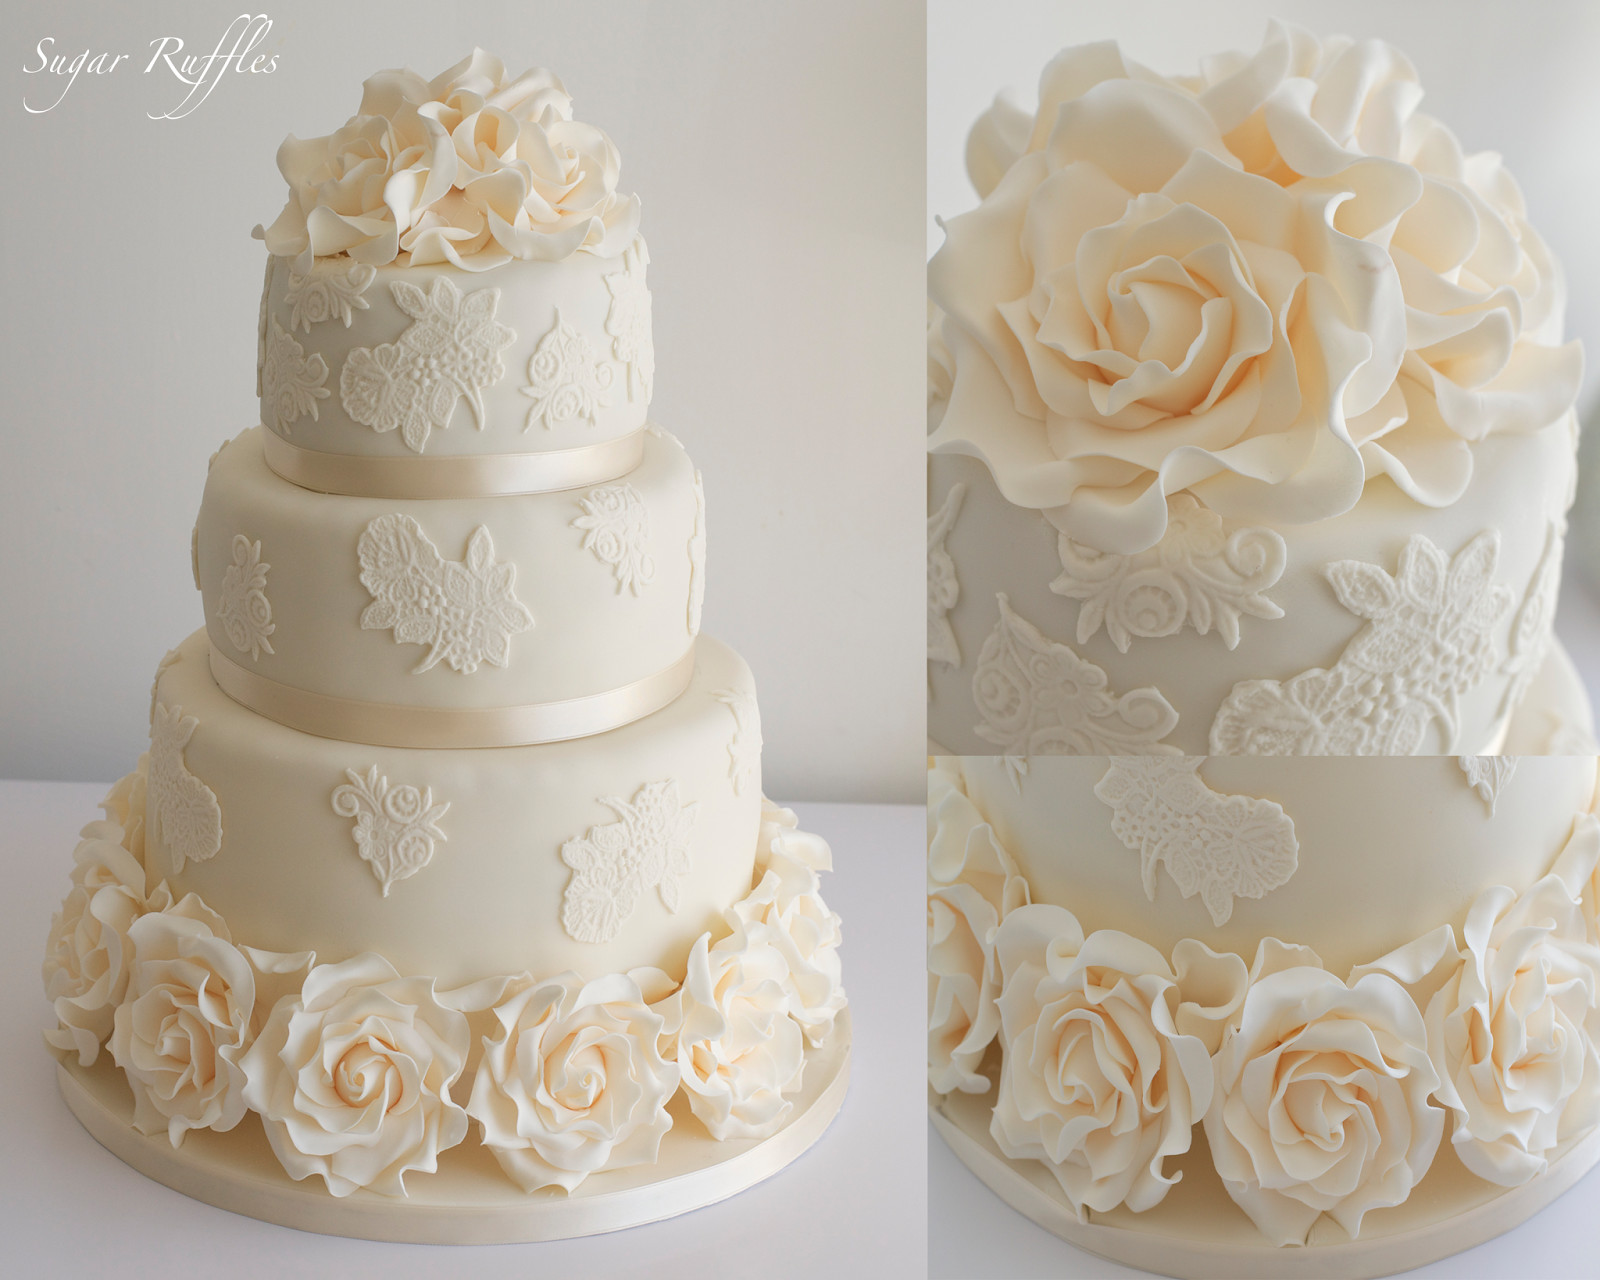 Wedding Cakes Roses
 Wedding Cakes with lace and roses